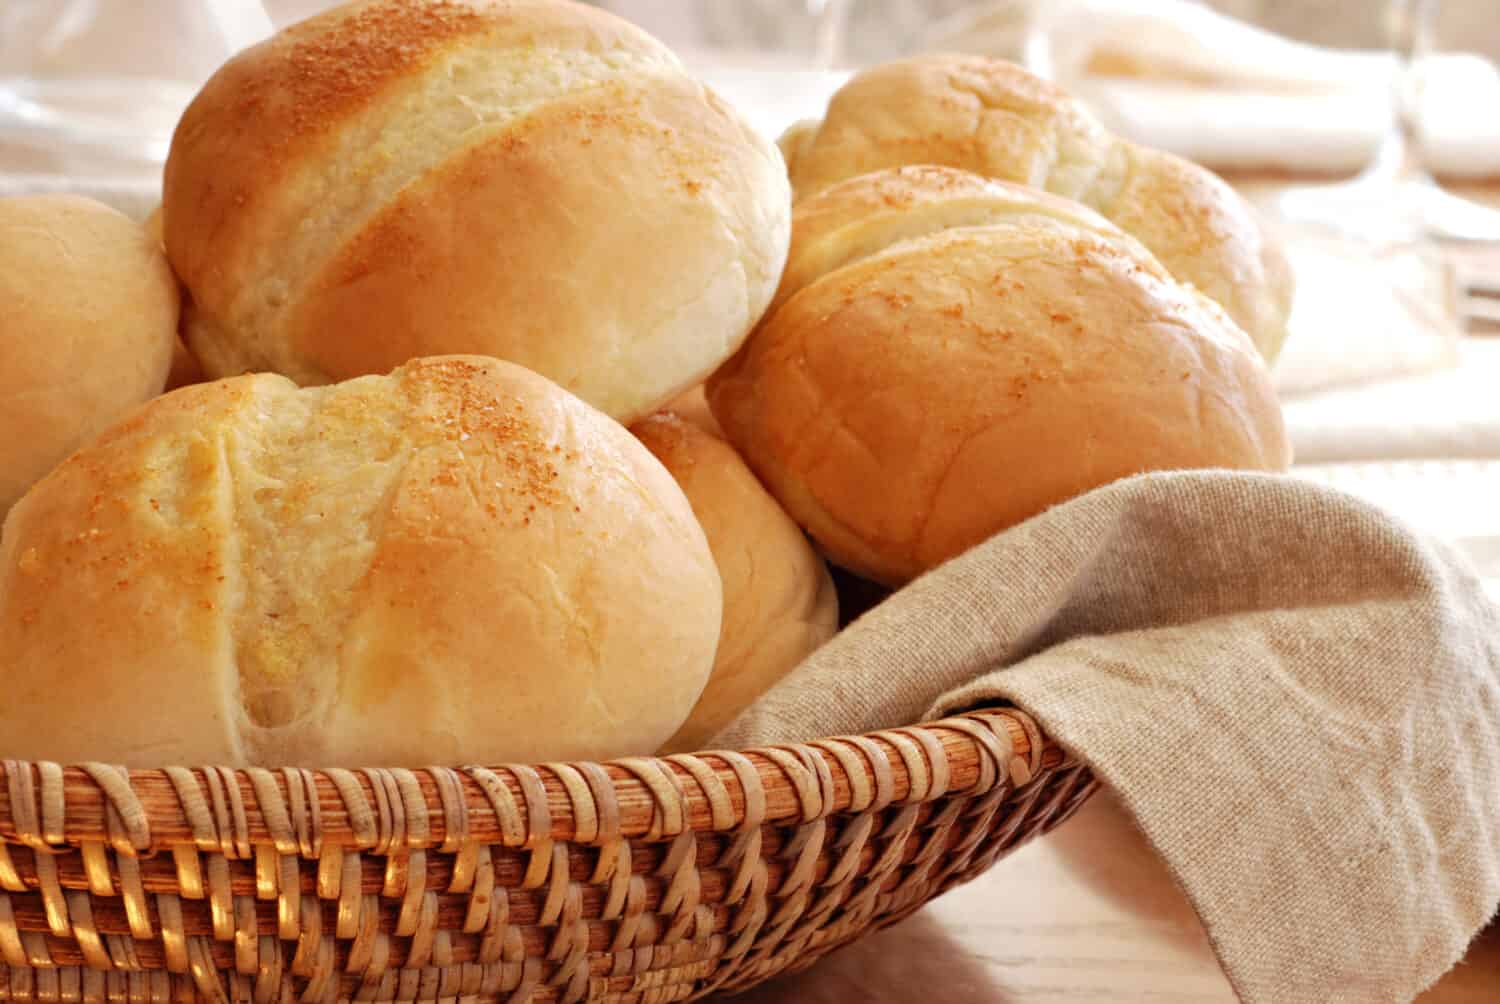 Basket of freshly baked dinner rolls with tableware in background.  Macro with shallow dof.